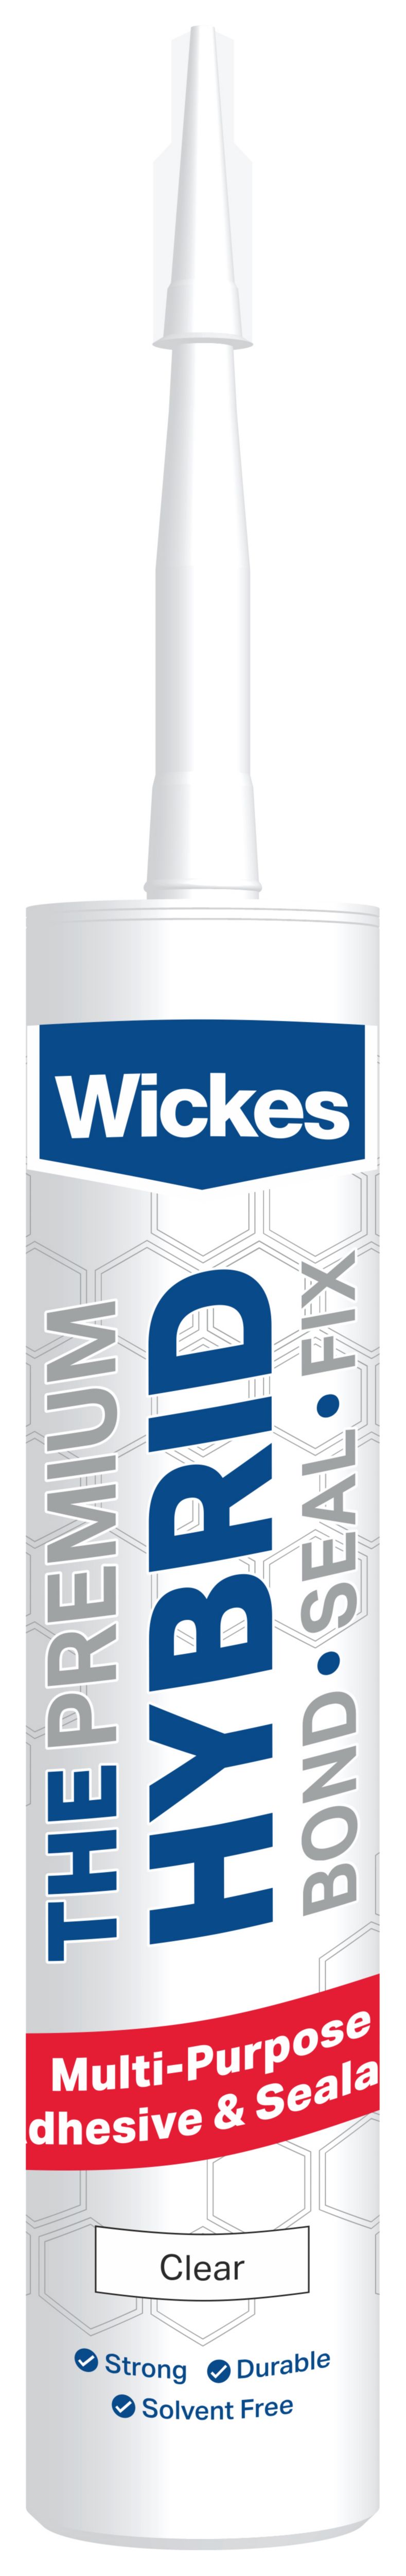 Image of Wickes Hybrid Sealant - Clear - 290 ml